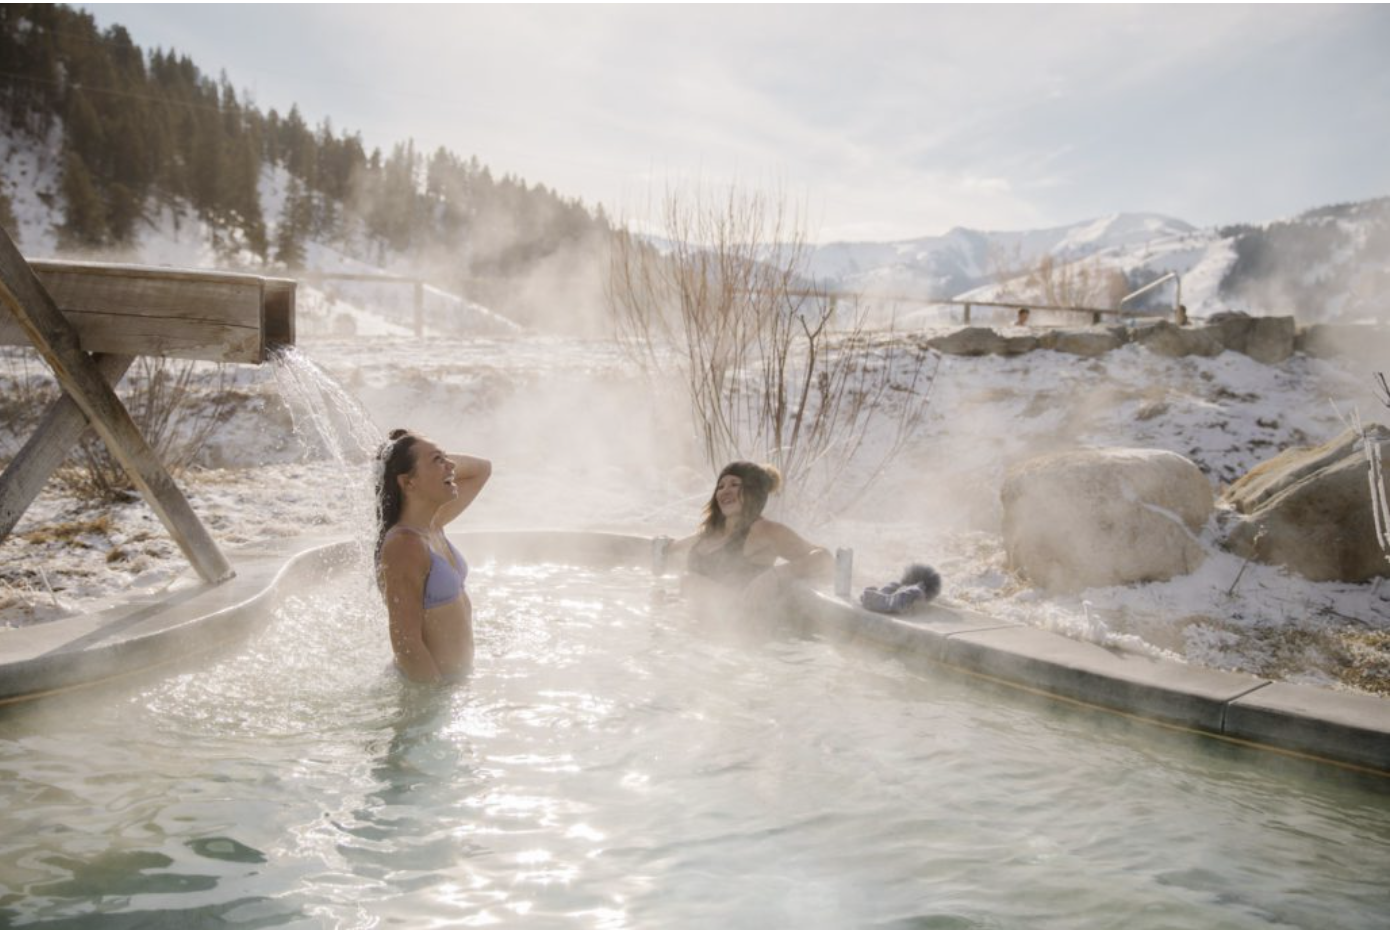 Two women in a hot springs pool.